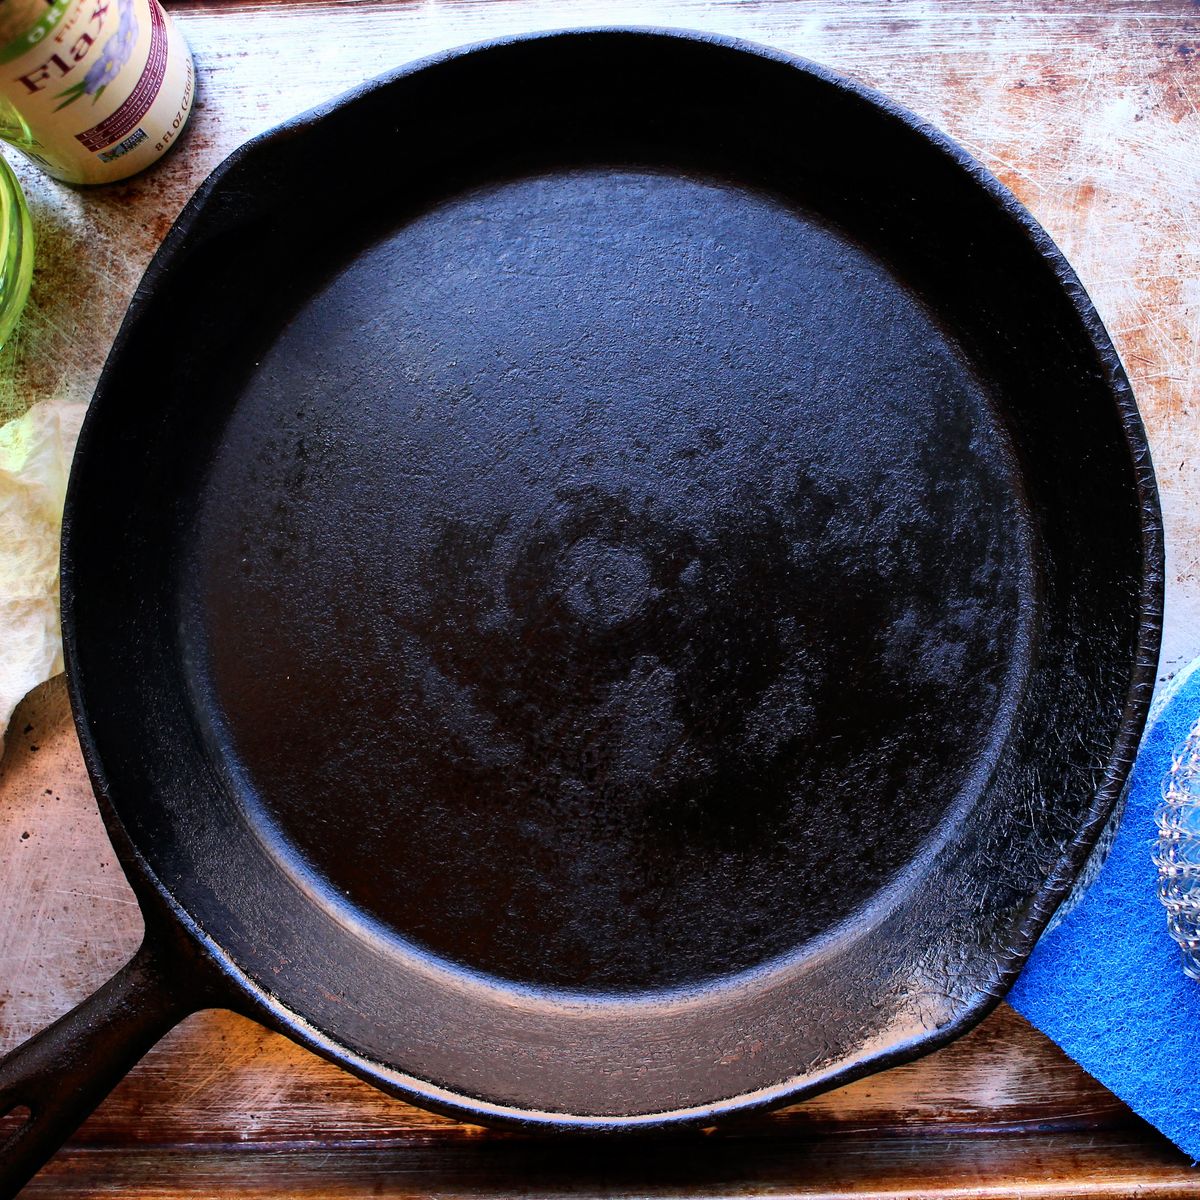 Alton Brown Swears By This $20 Cast-Iron Skillet from Lodge